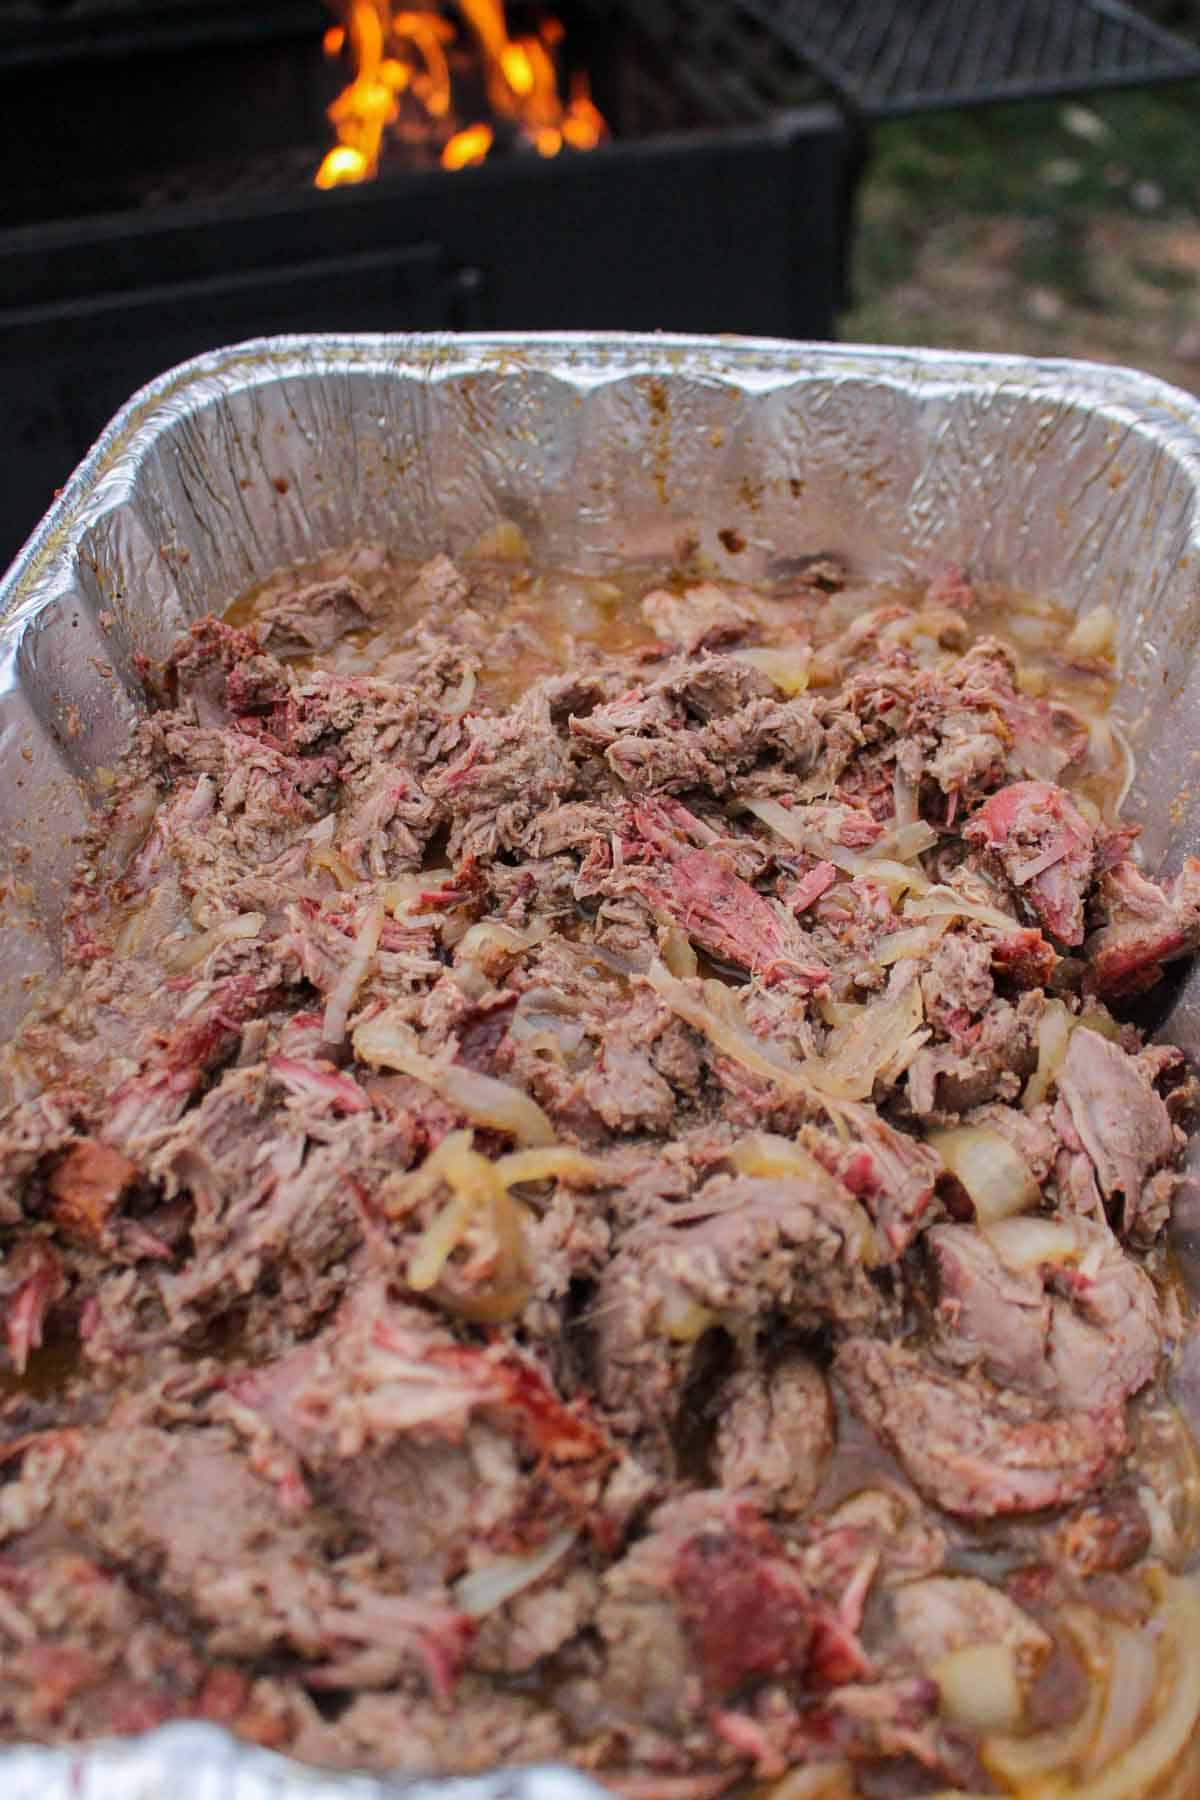 The shredded, pulled leg of lamb meat.